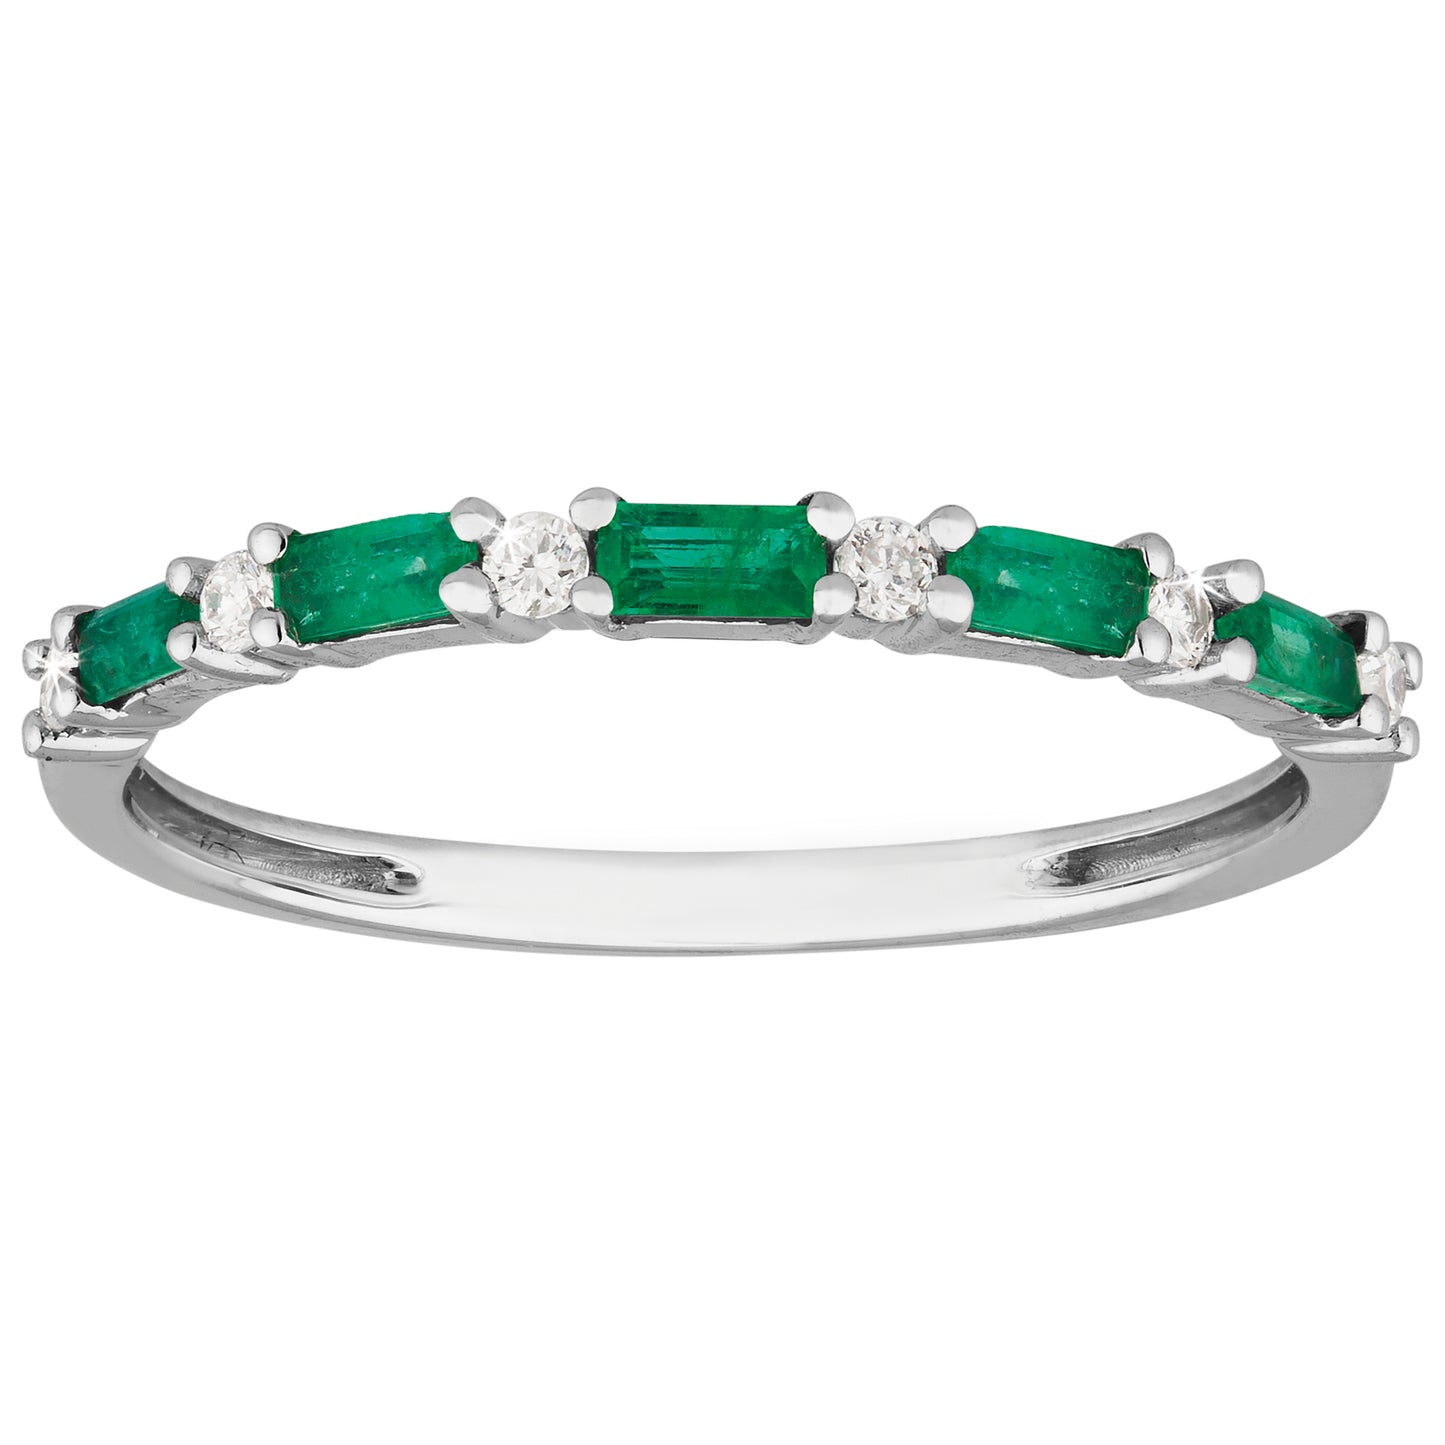 Six Beautiful Baquette Cut Emeralds with Small Round Diamond Intervals with a eternity band design in 9ct White Gold.